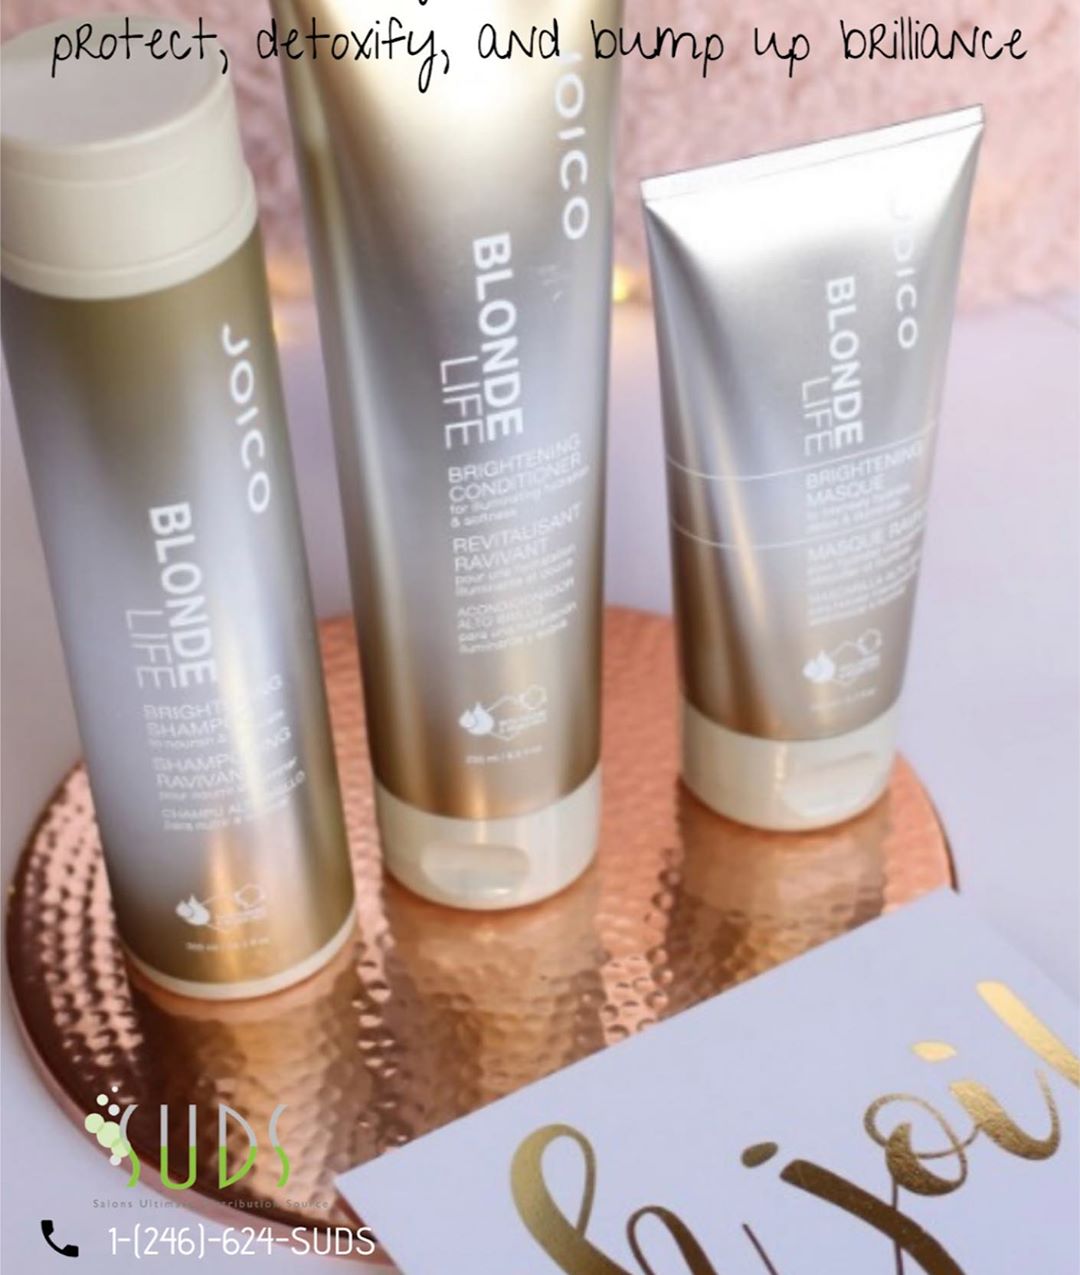 Joico Blonde Life – A glistening collection of home-care products that protect, …